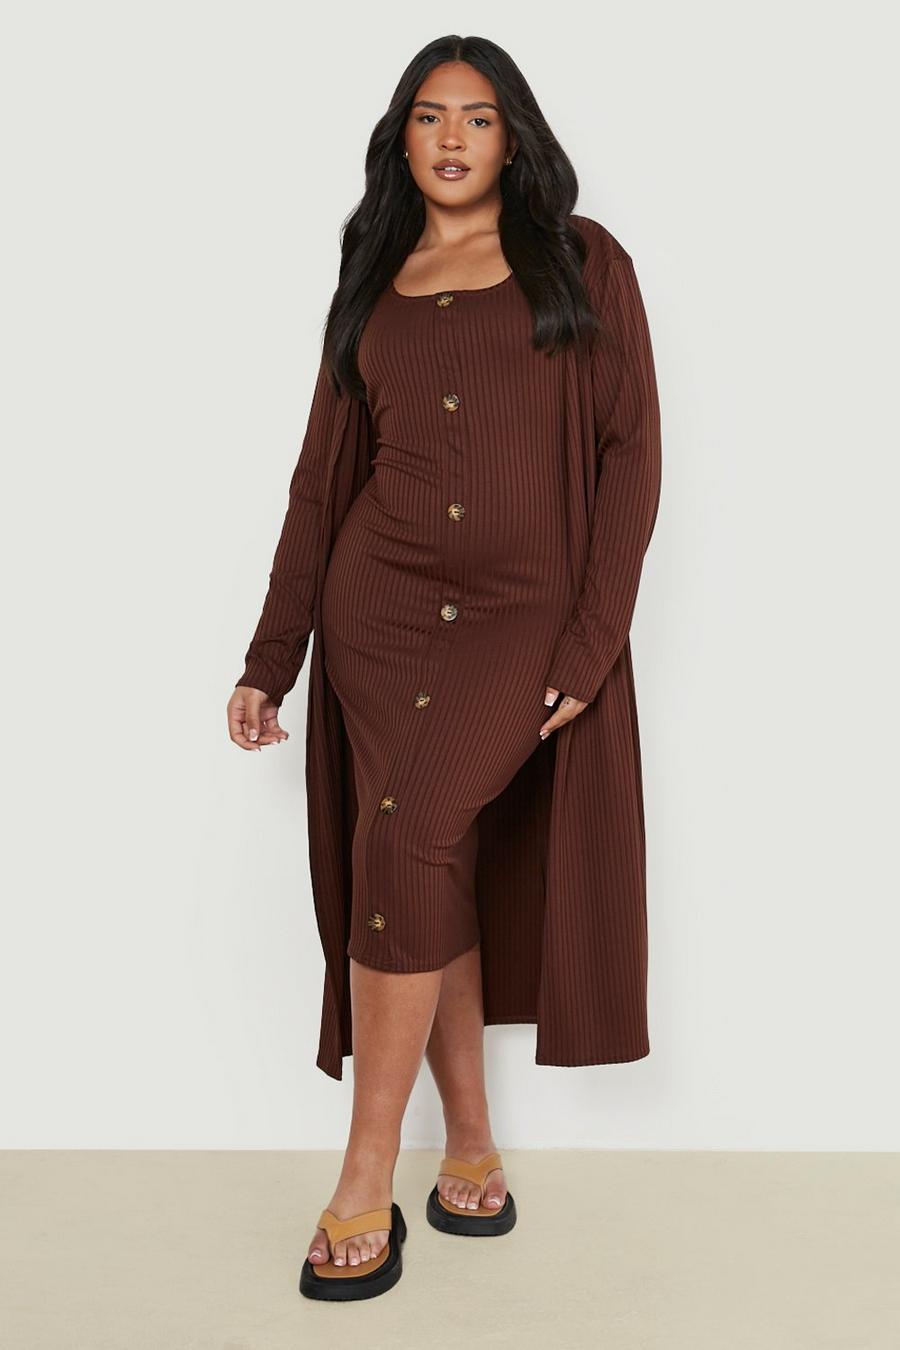 Chocolate brun Plus Horn Button Midi Dress And Duster Co-ord